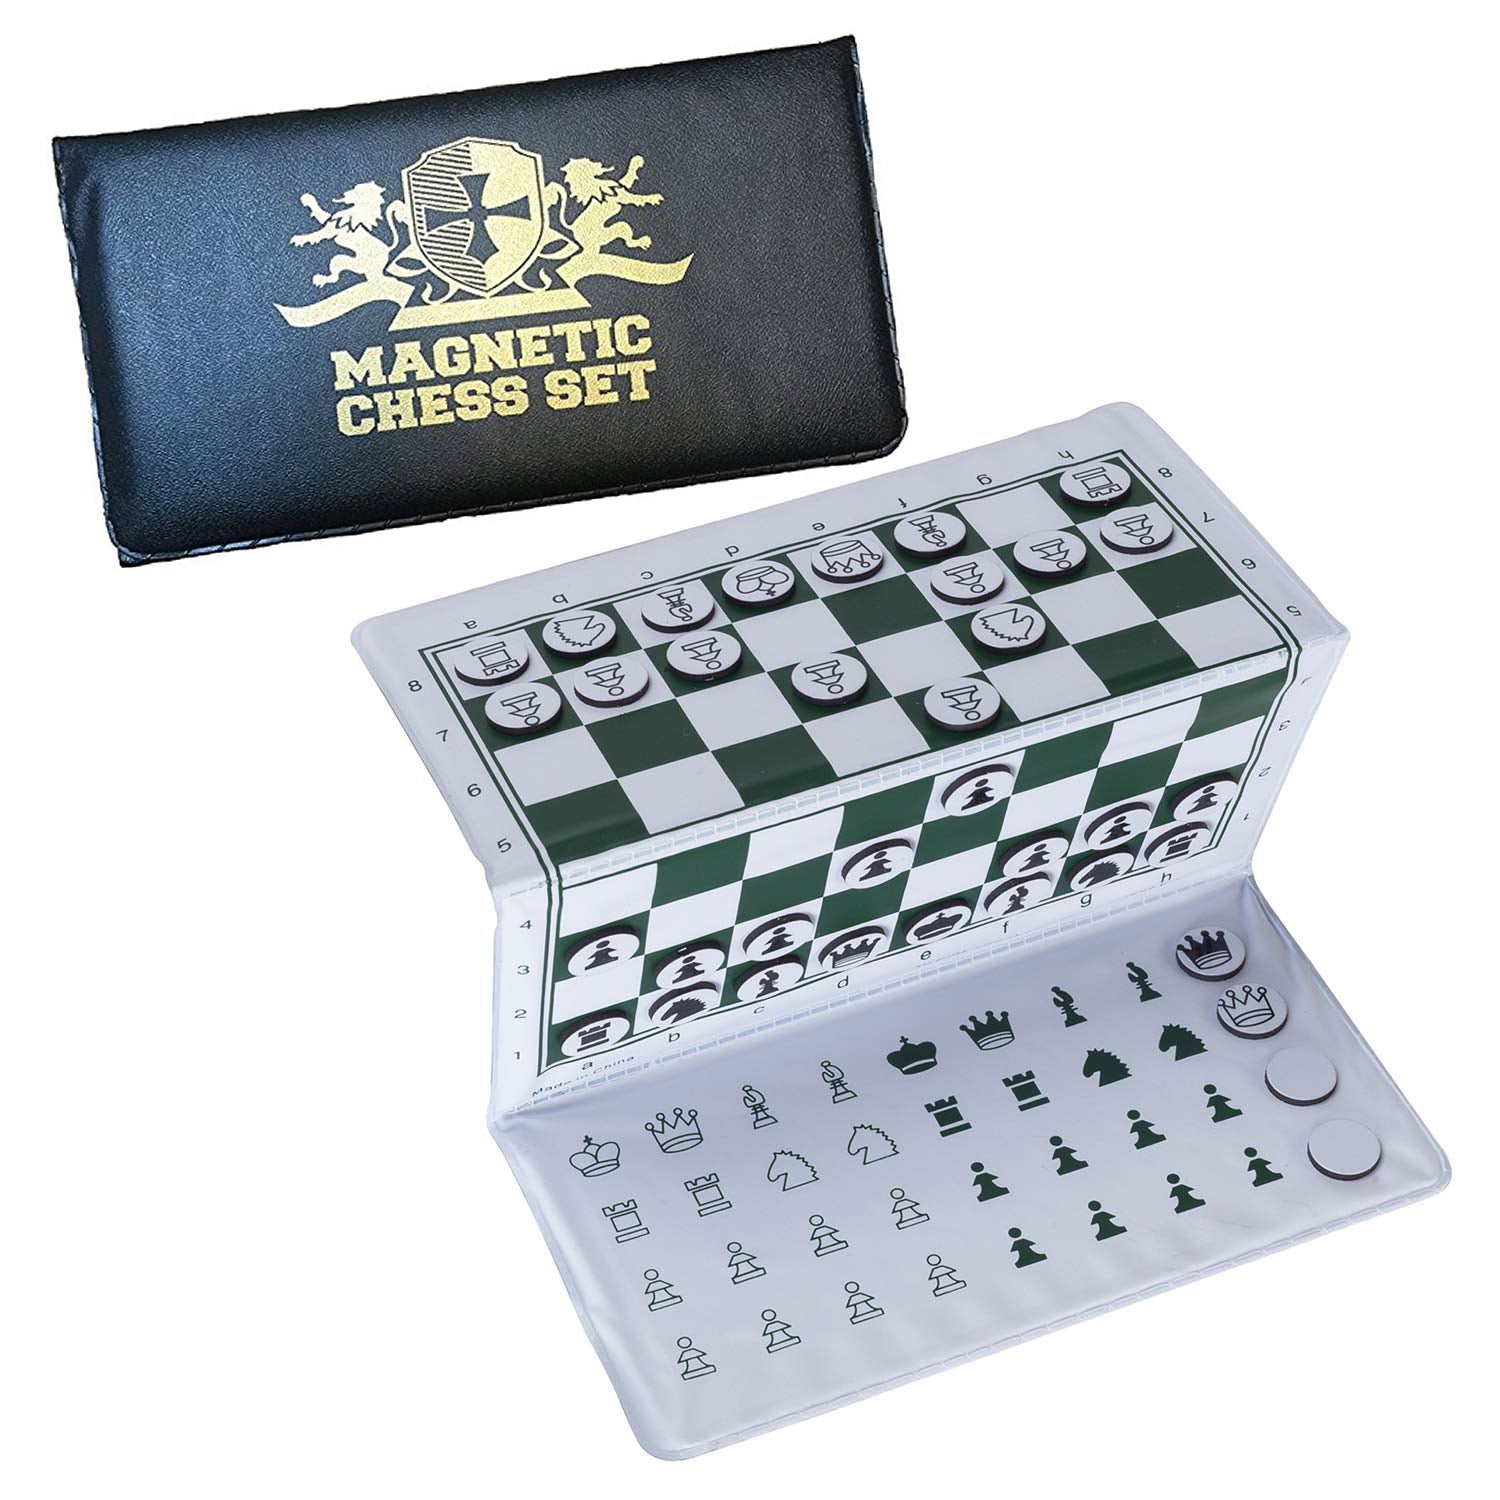 THE WILSWANK 10 x 10 Inch Premium Foldable Magnetic Chess Set with Free  Chess Bag and Strategy Guide Book (How to Play Chess)